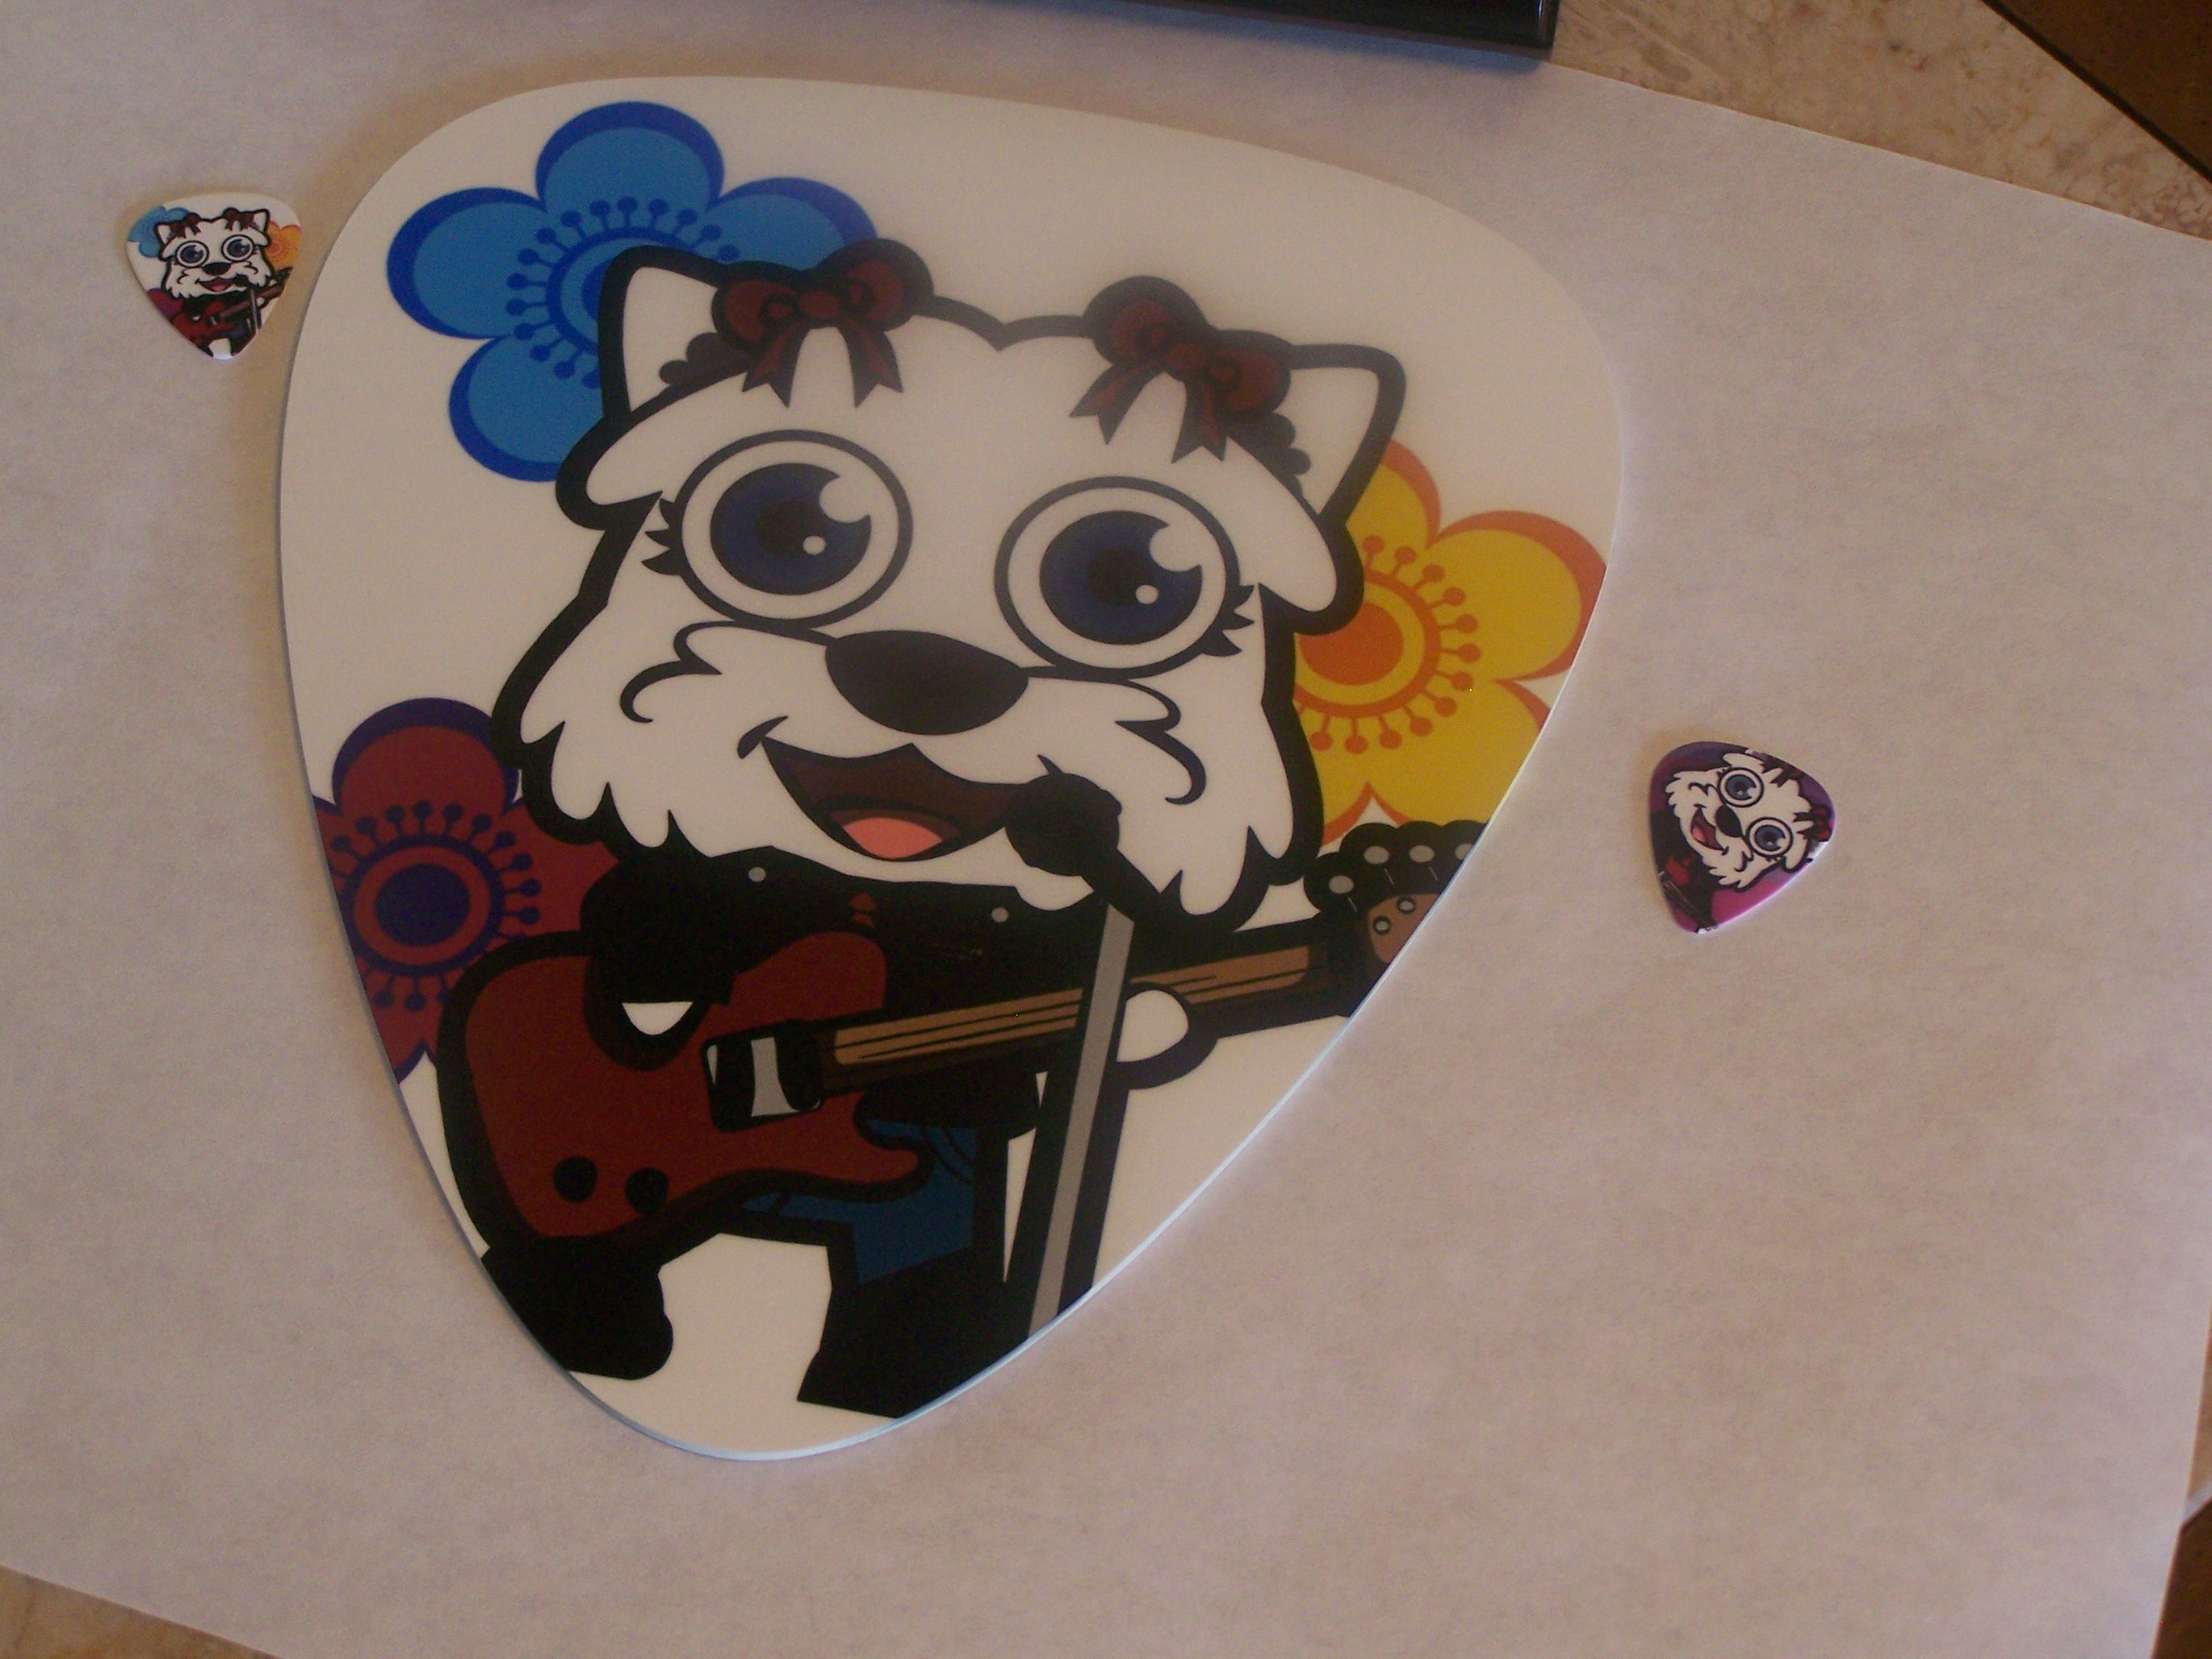 guitar pick using frp, and regular guitar pick made with sublimation printing